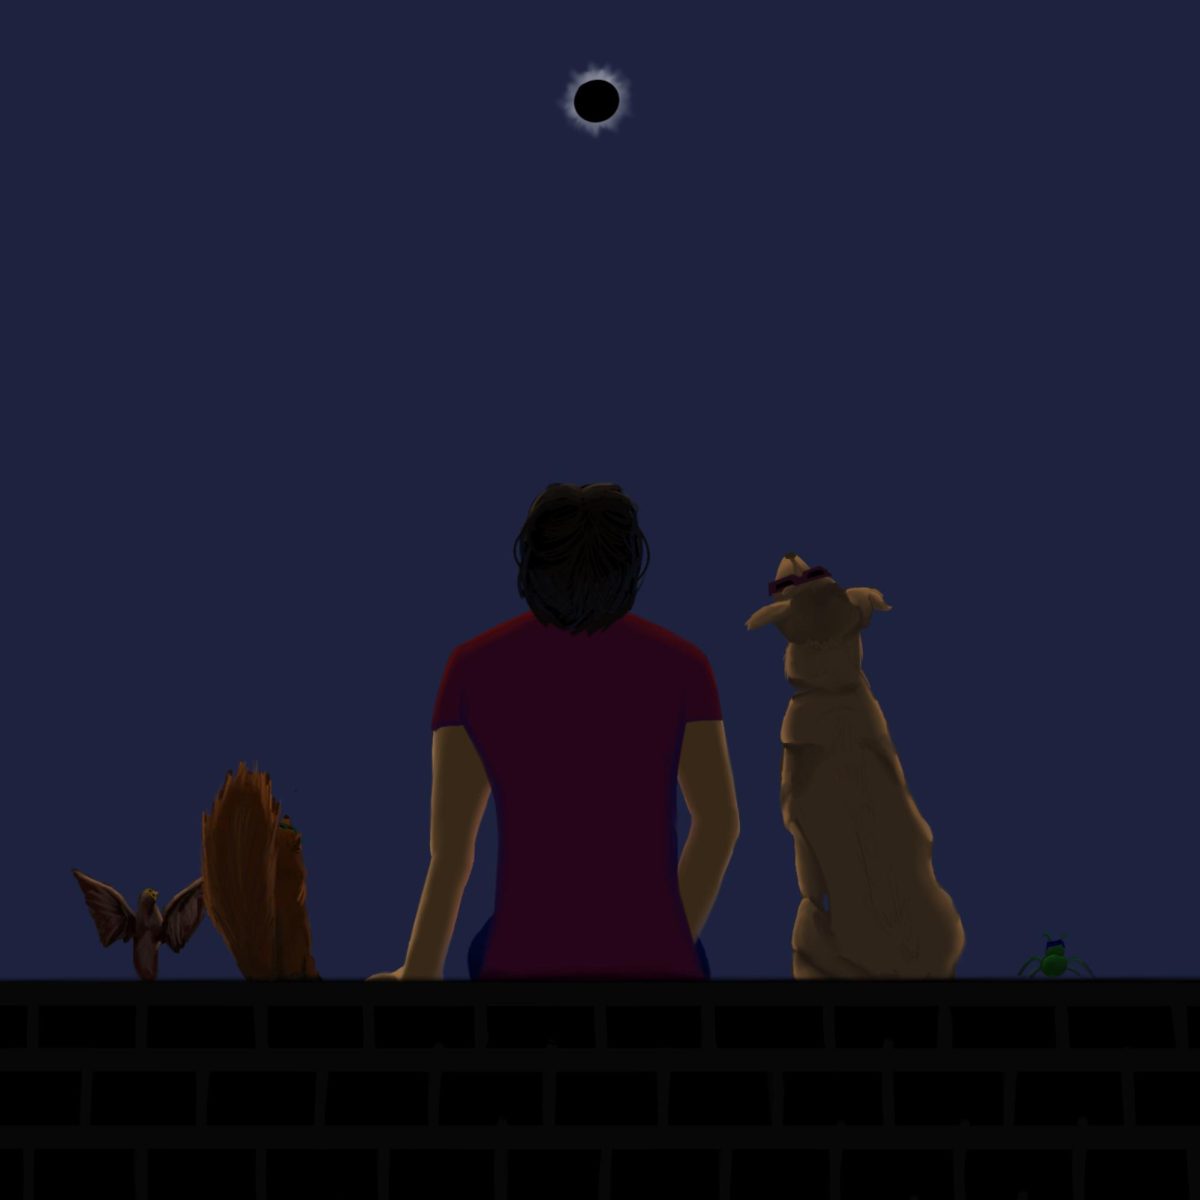 A bat, squirrel, man, dog and bug look up at the eclipse.